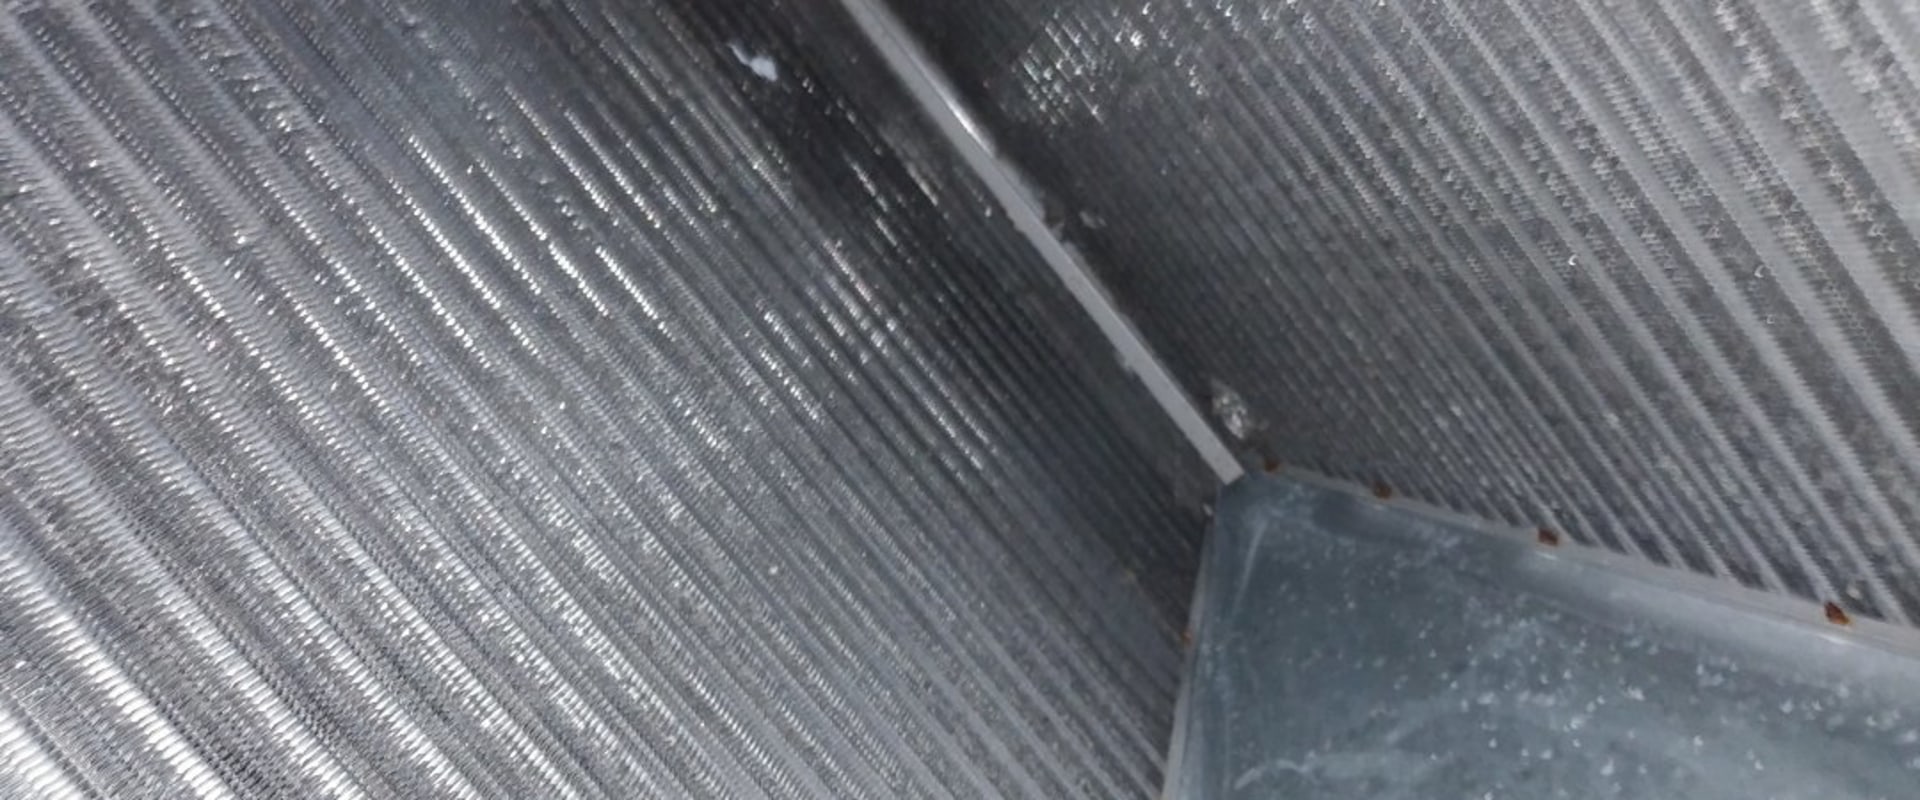 Aeroseal HVAC Air Duct Sealing in West Palm Beach, FL: What You Need to Know